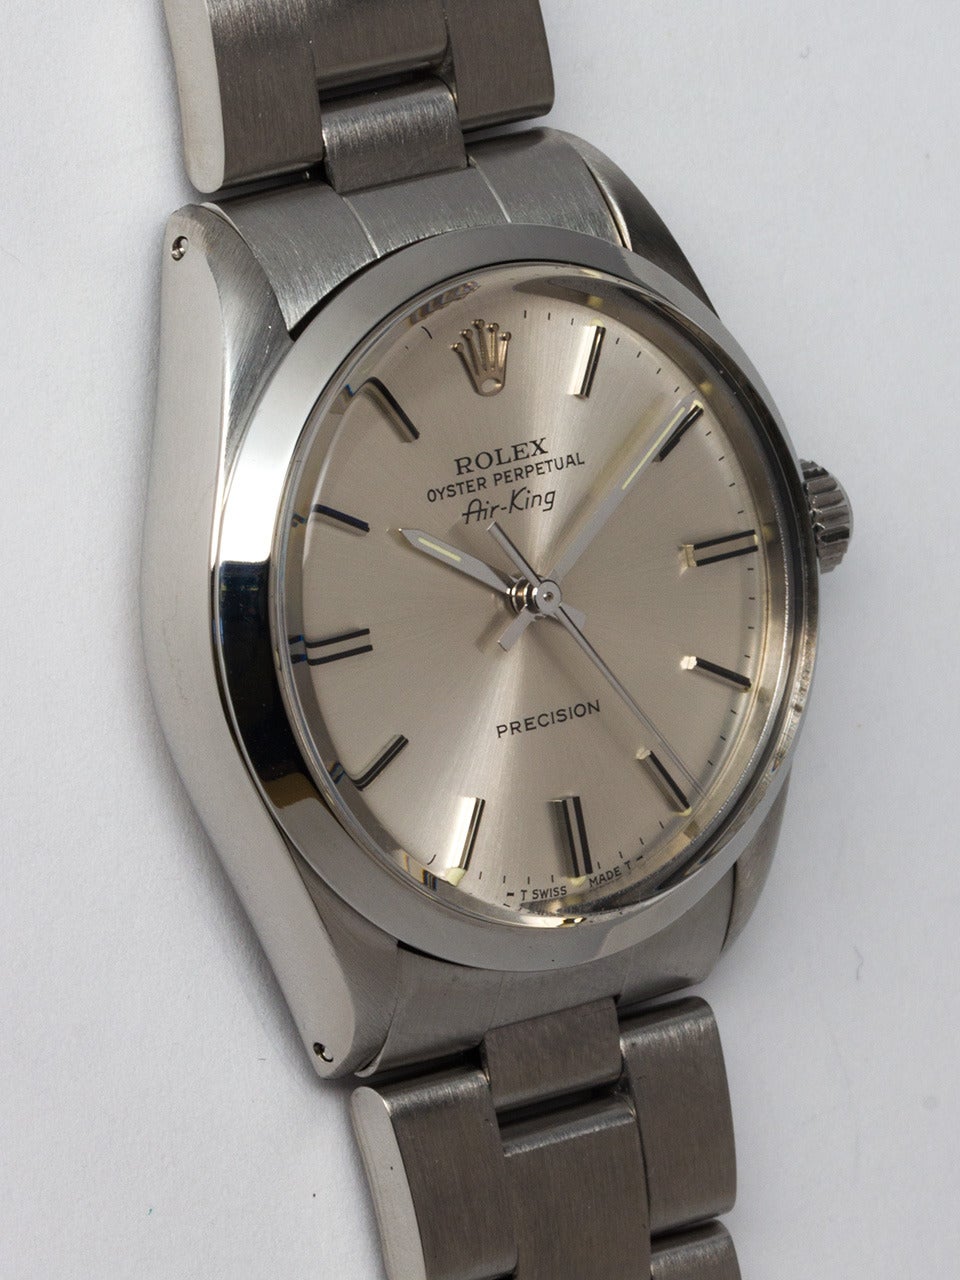 Rolex Stainless Steel Oyster Perpetual Airking Wristwatch ref 5500 serial # L4 circa 1988. 34mm diameter case with smooth bezel and acrylic crystal. Beautiful condition original silvered satin dial with applied silver indexes and silver satin hands.